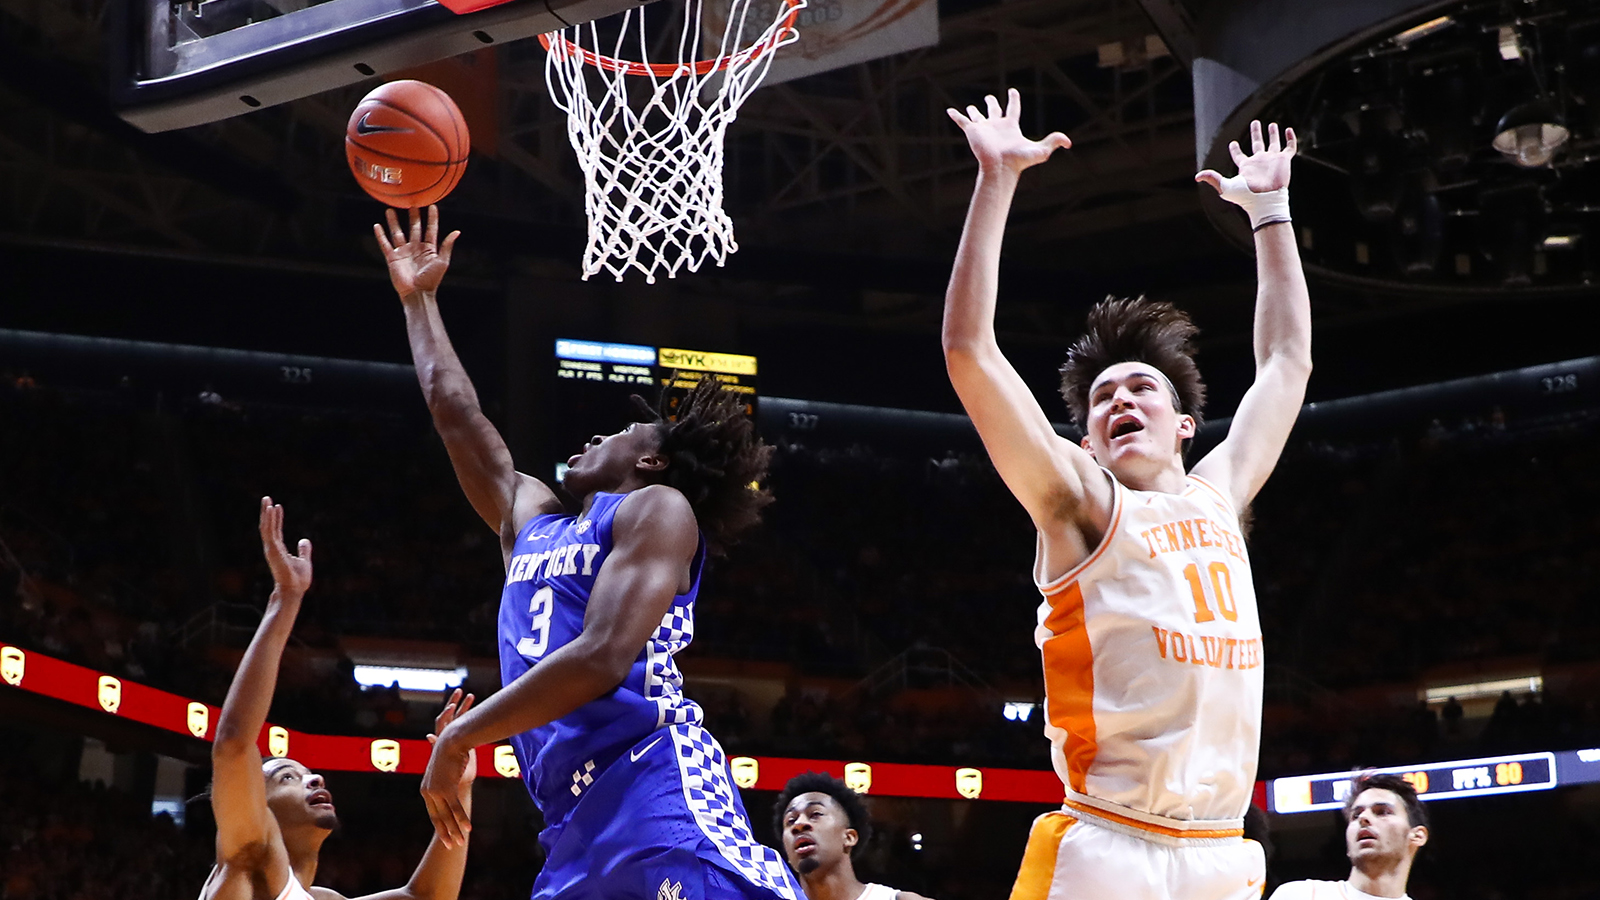 No. 15 Kentucky Wins at Tennessee, 77-64